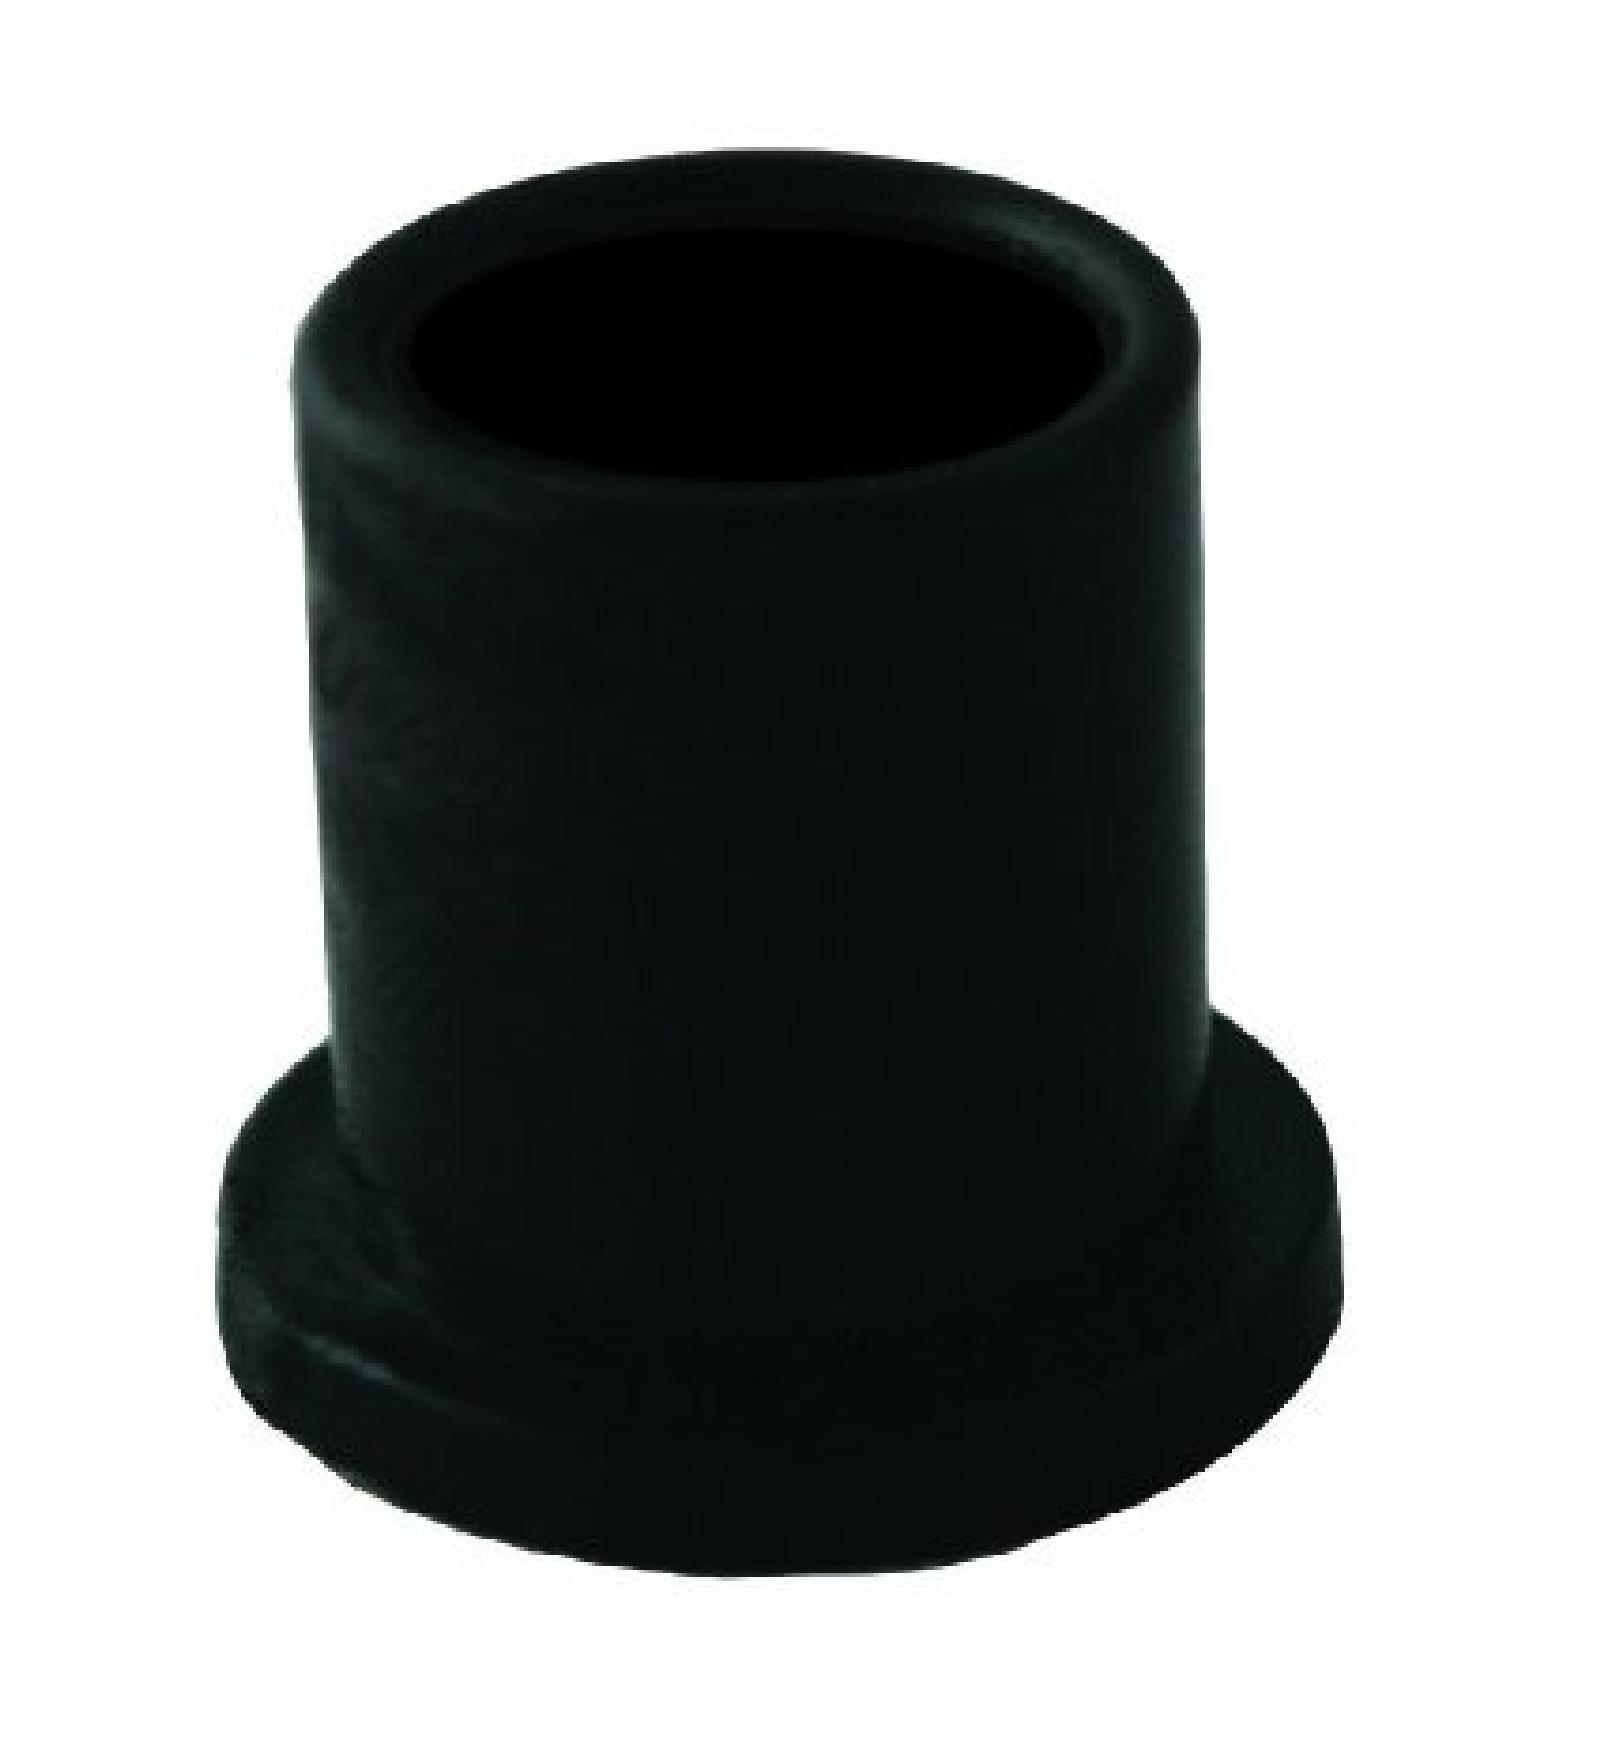 BUSHING PLASTIC 21/32 X 5 part# 45-095 by Oregon - Click Image to Close